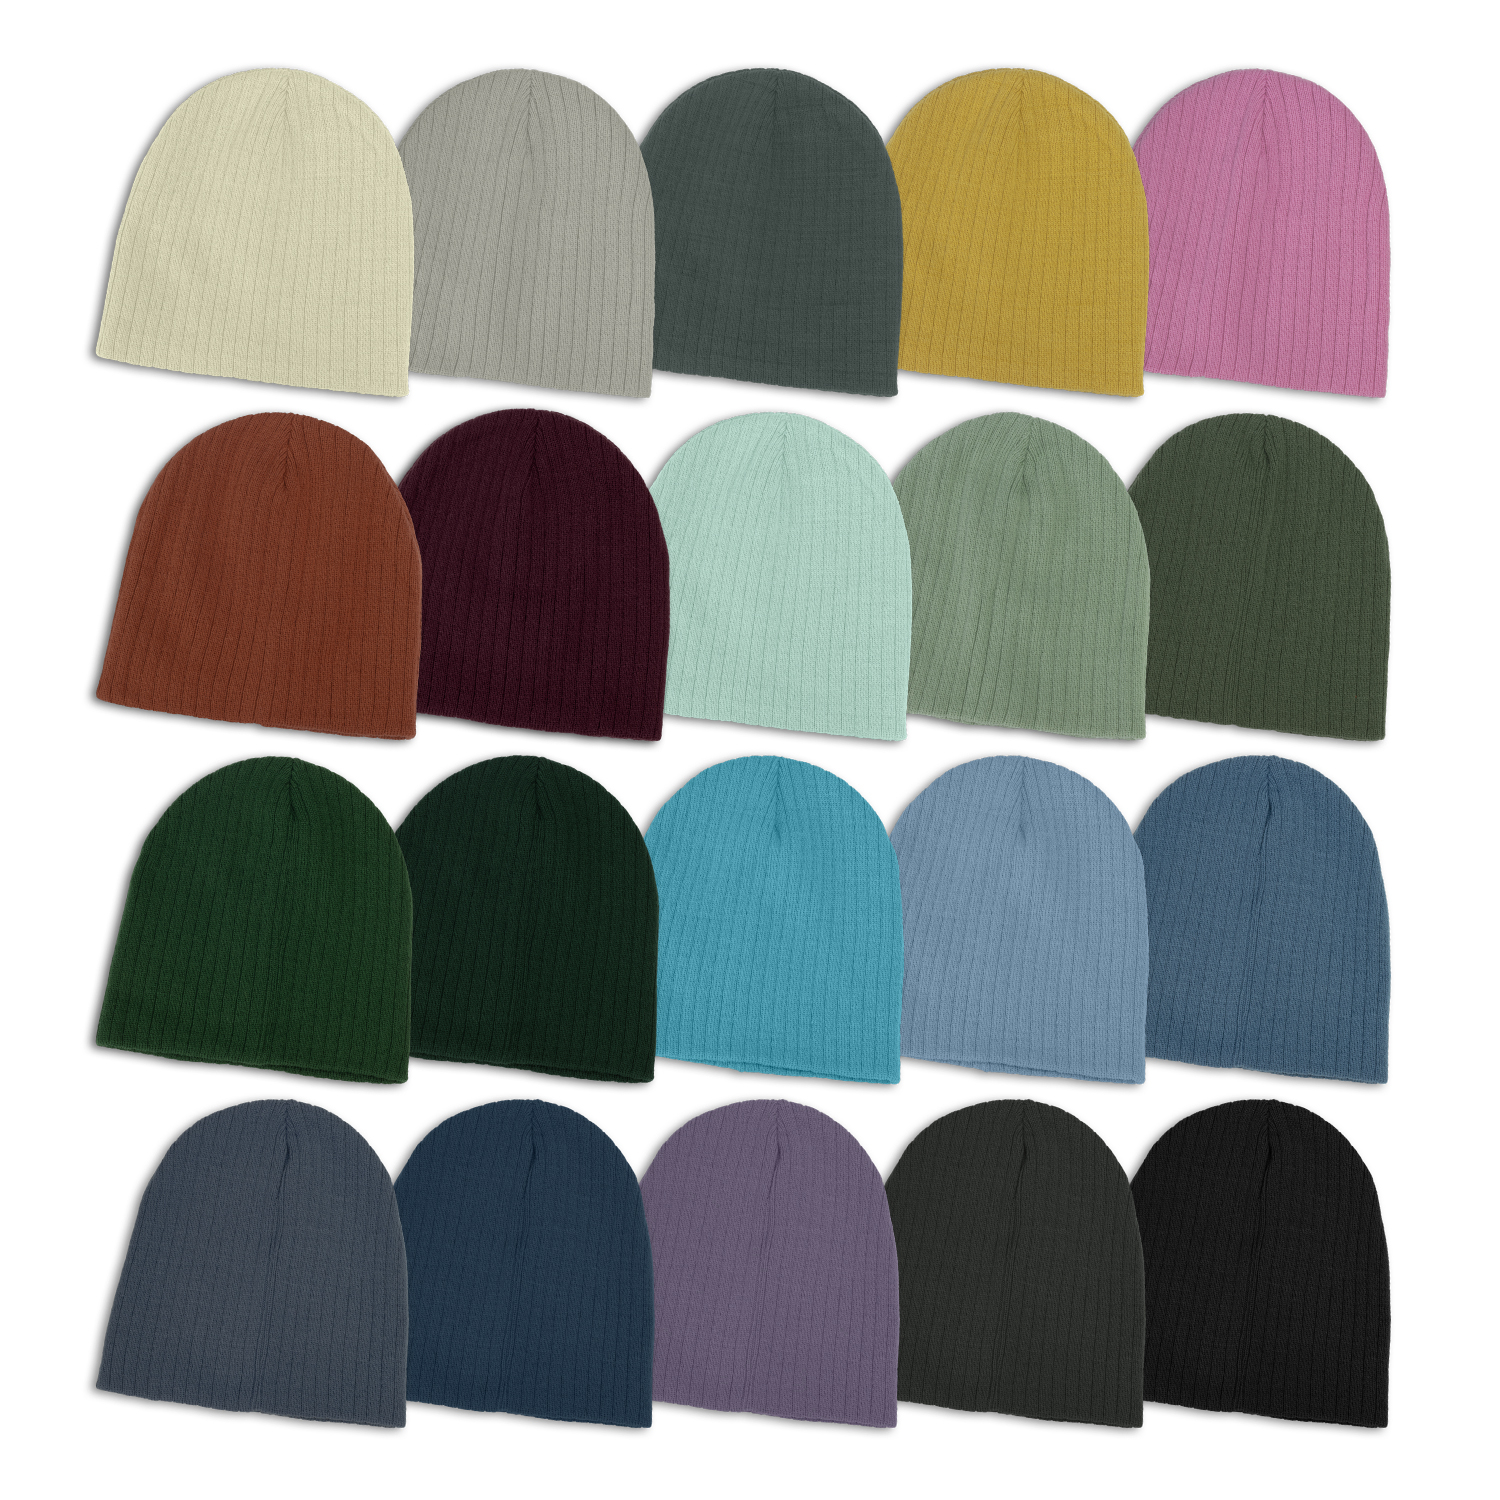 Headwear - Nebraska Cable Knit Beanie with Custom Embroidery - Available in 20 colours!